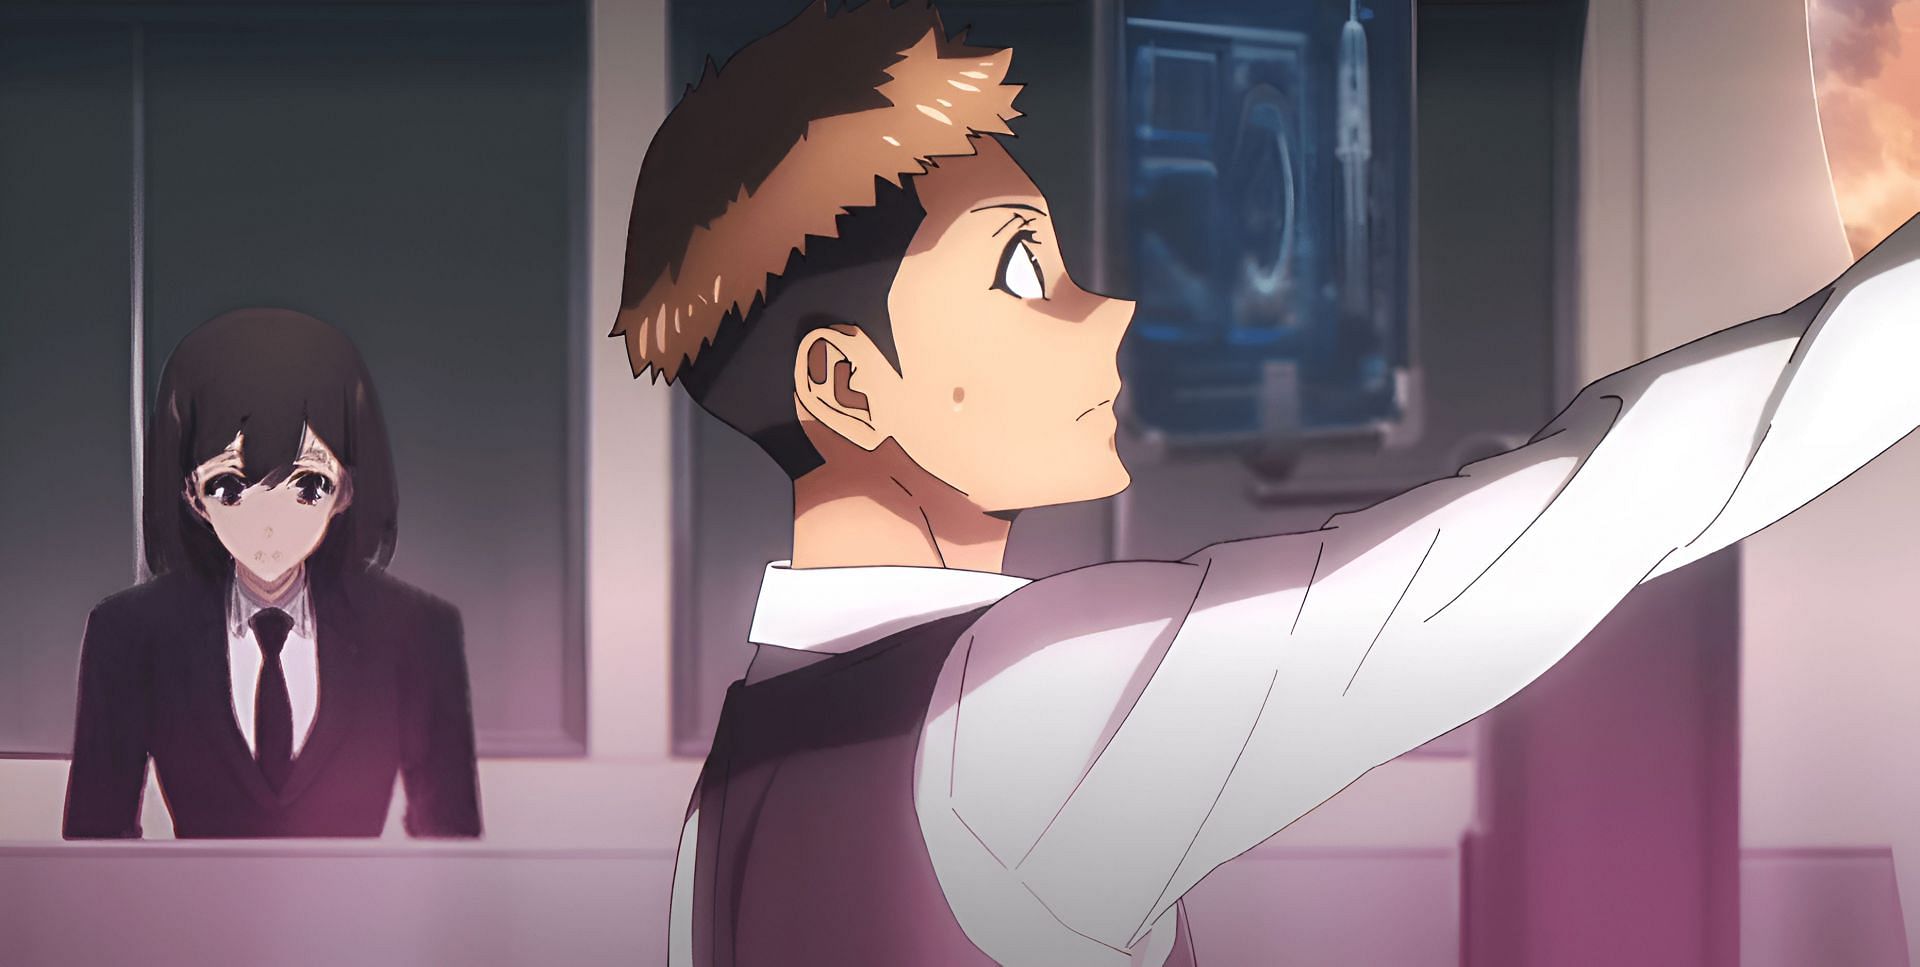 Yoo Jinho as seen in the anime (Image via A-1 Pictures)